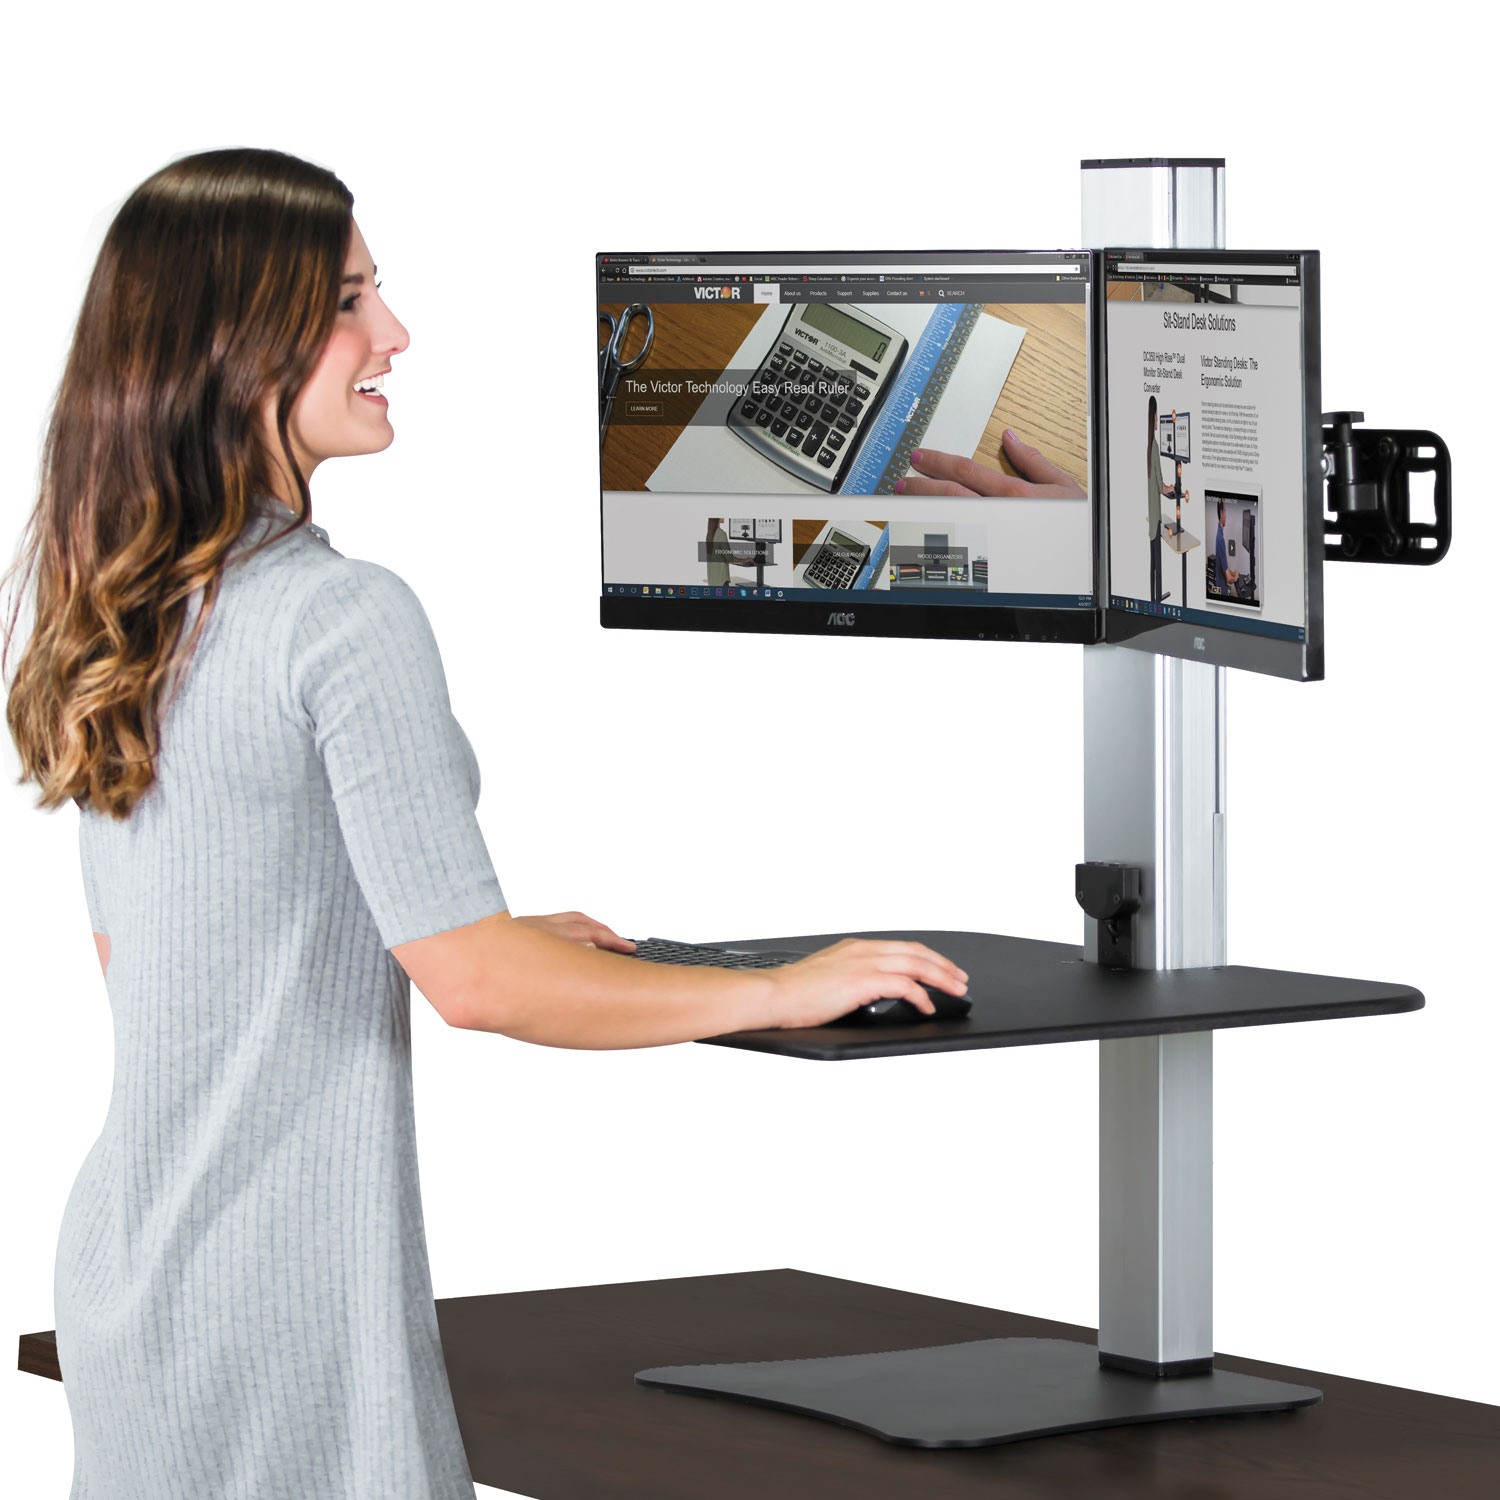  Victor DC450 DC450 High Rise Electric Dual Monitor Standing Desk Workstation, 28w x 23d x 20.25h, Black/Aluminum (VCTDC450) 